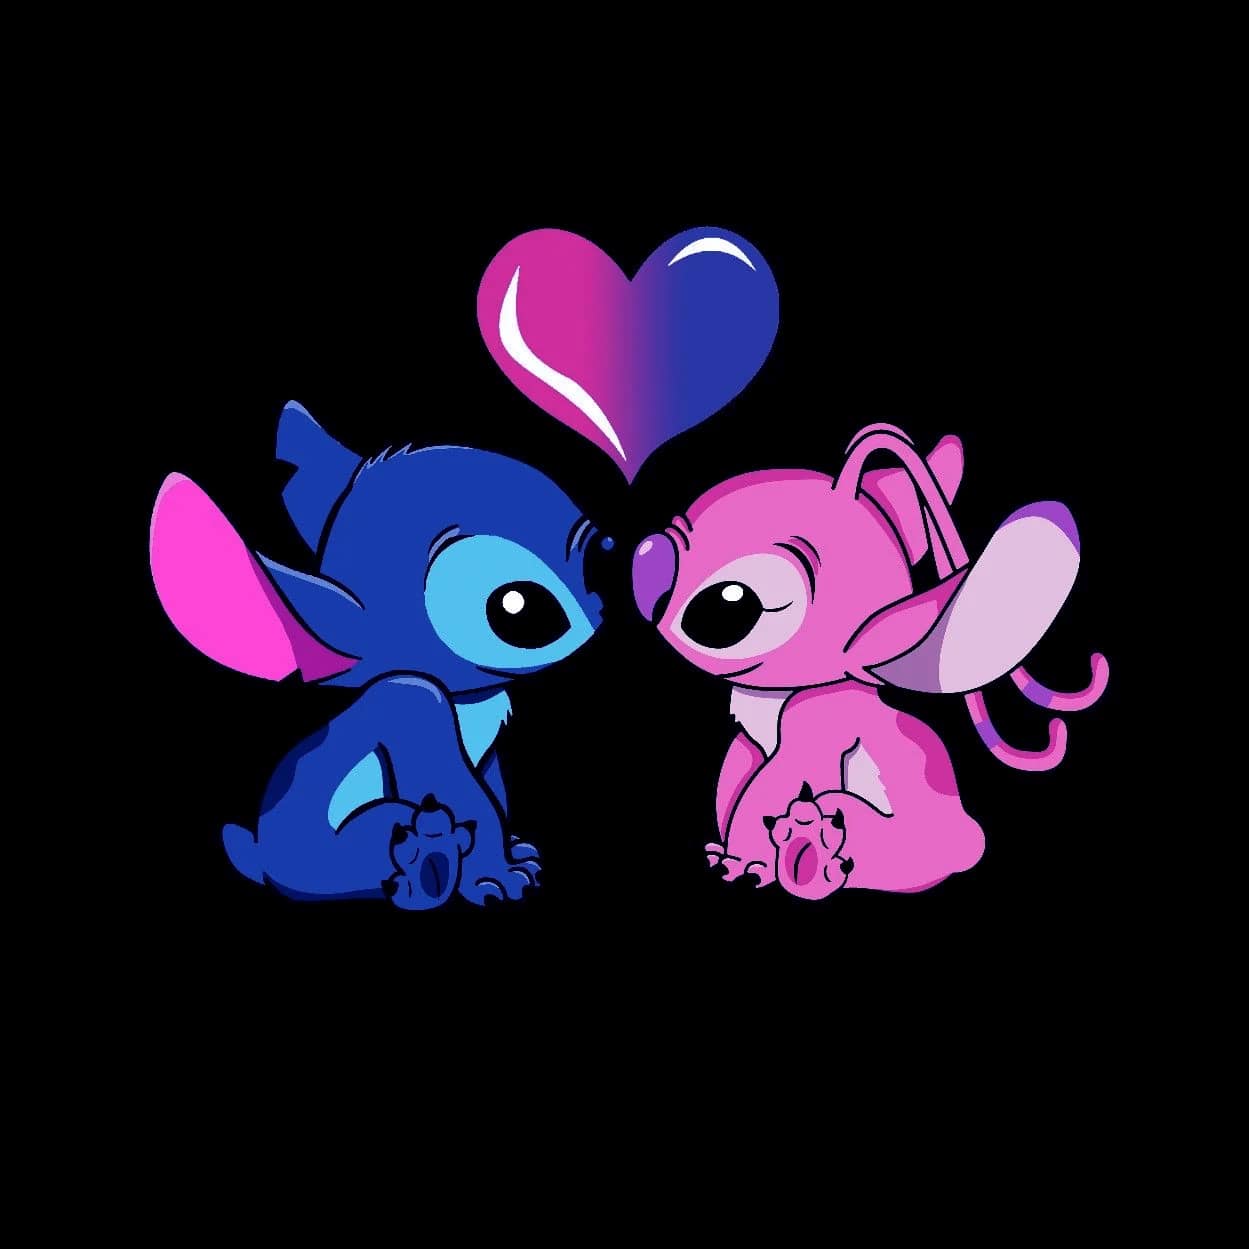 Stitch And Angel Wallpaper - NawPic